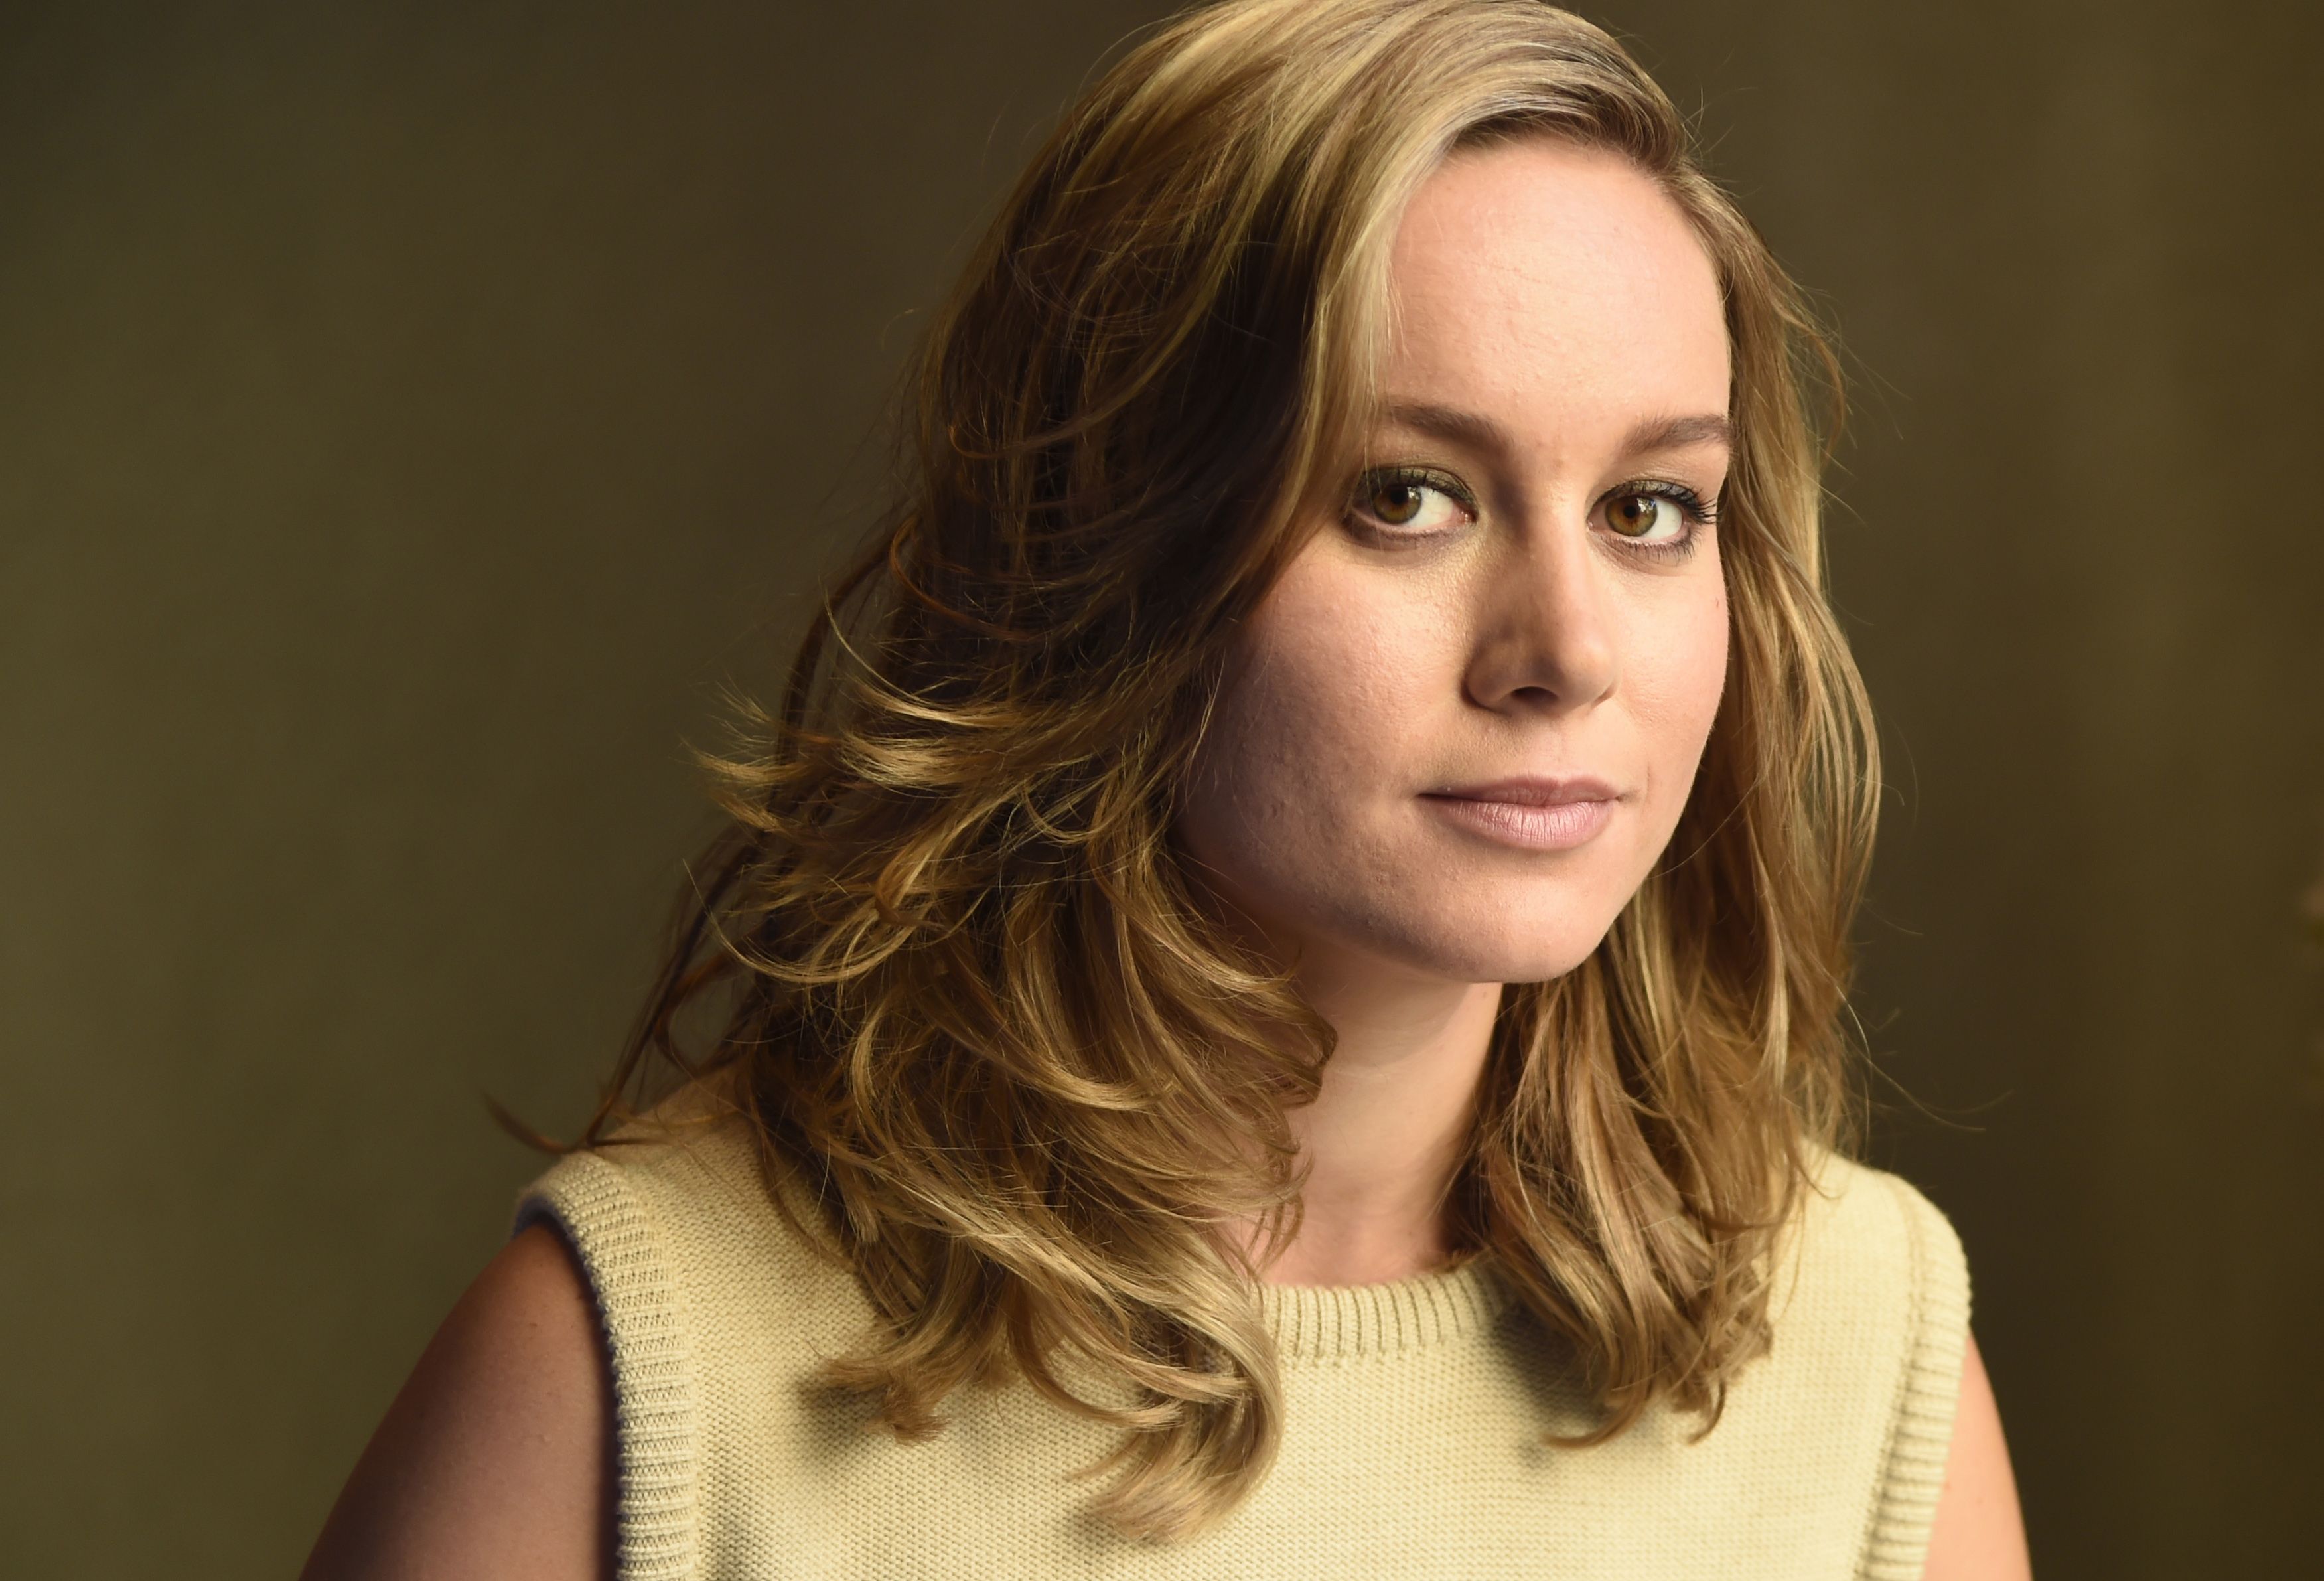 Cute Brie Larson Actress Wallpapers